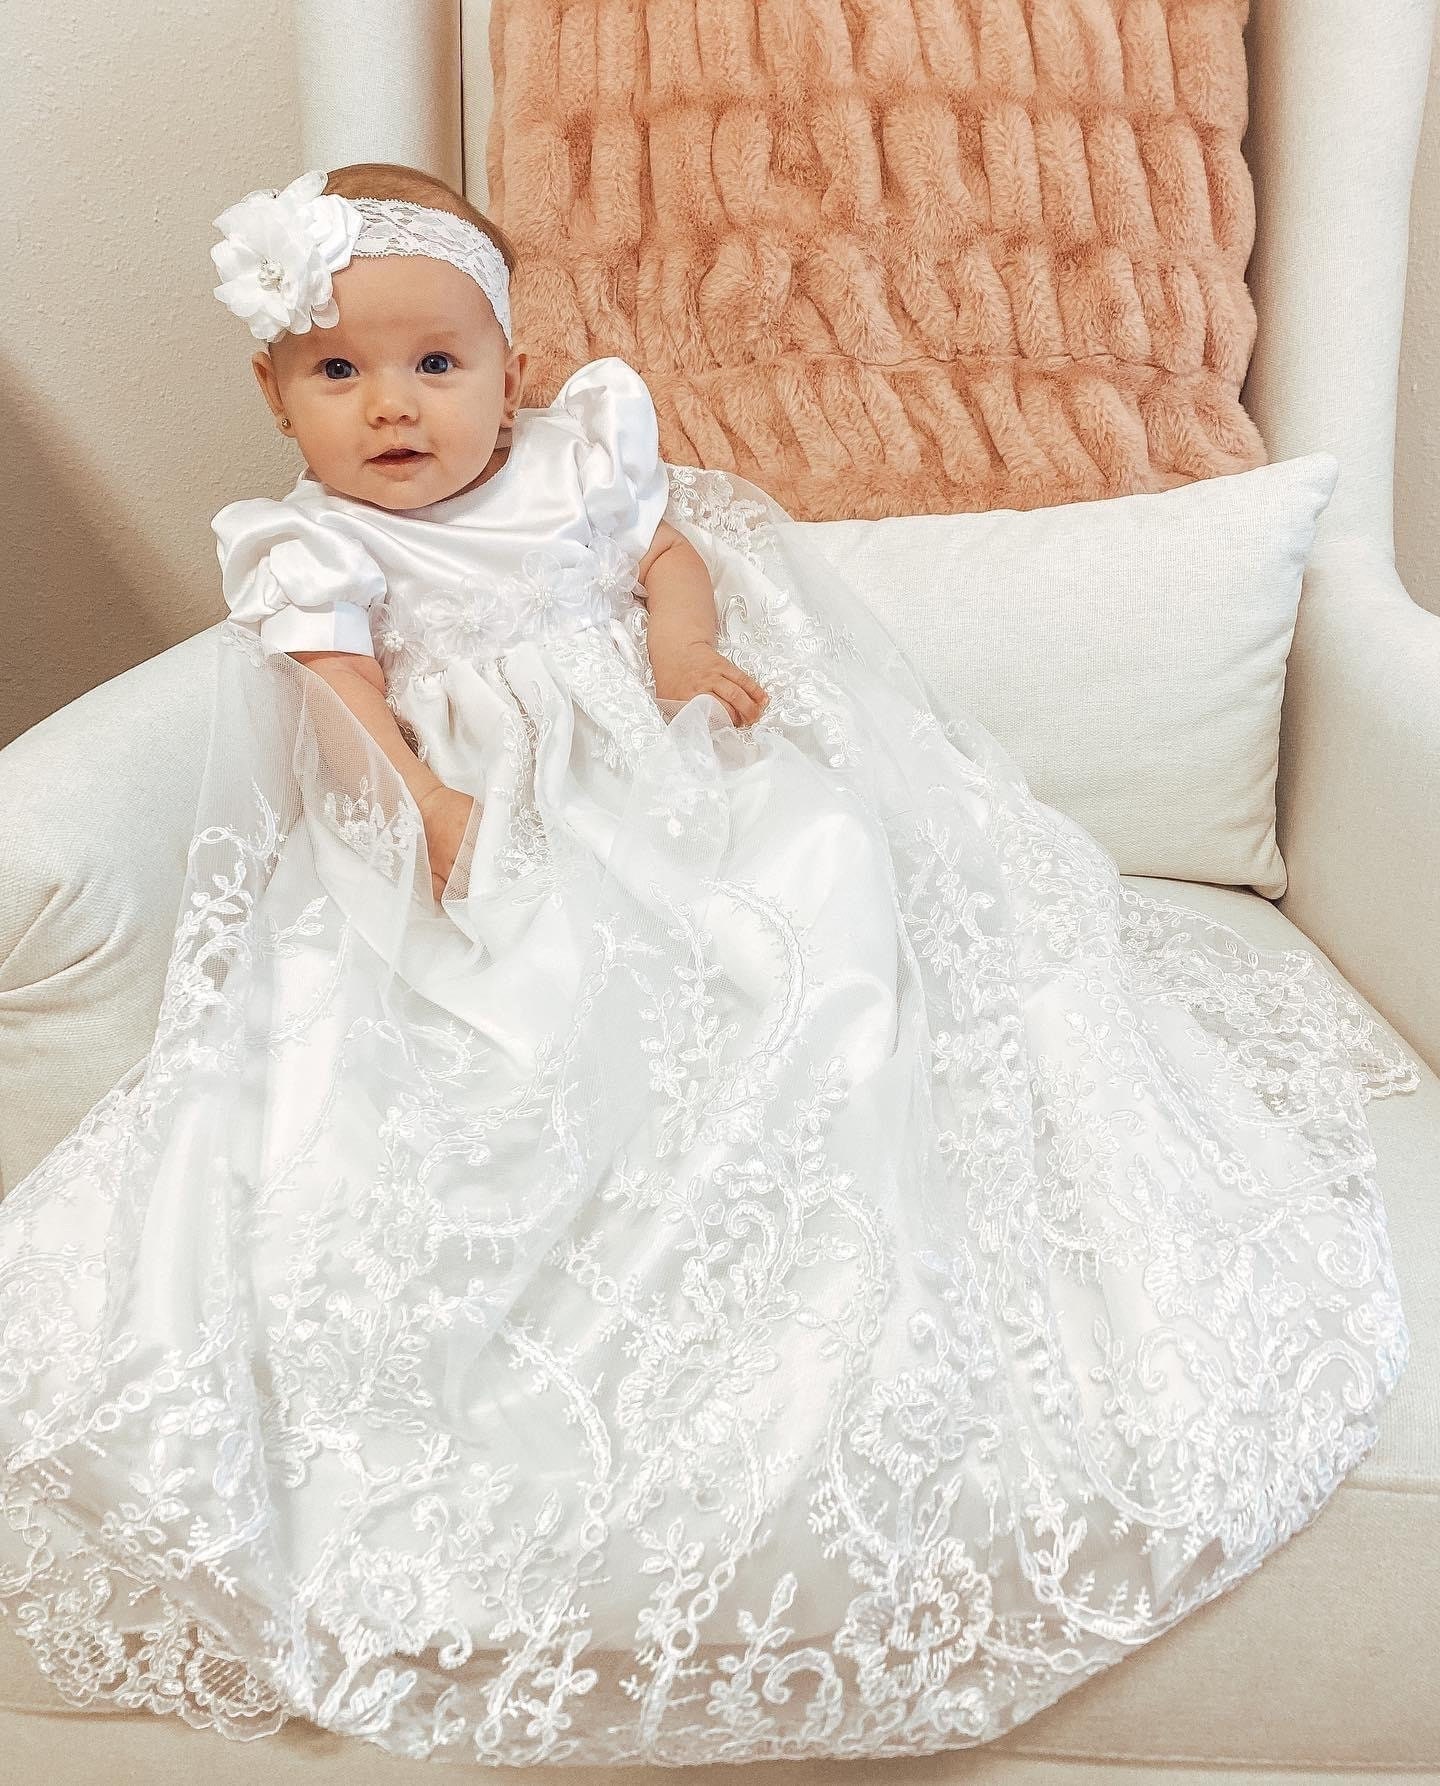 The talia/tyler T-yoke White on White Christening Gown With Hand Embroidery  - Etsy